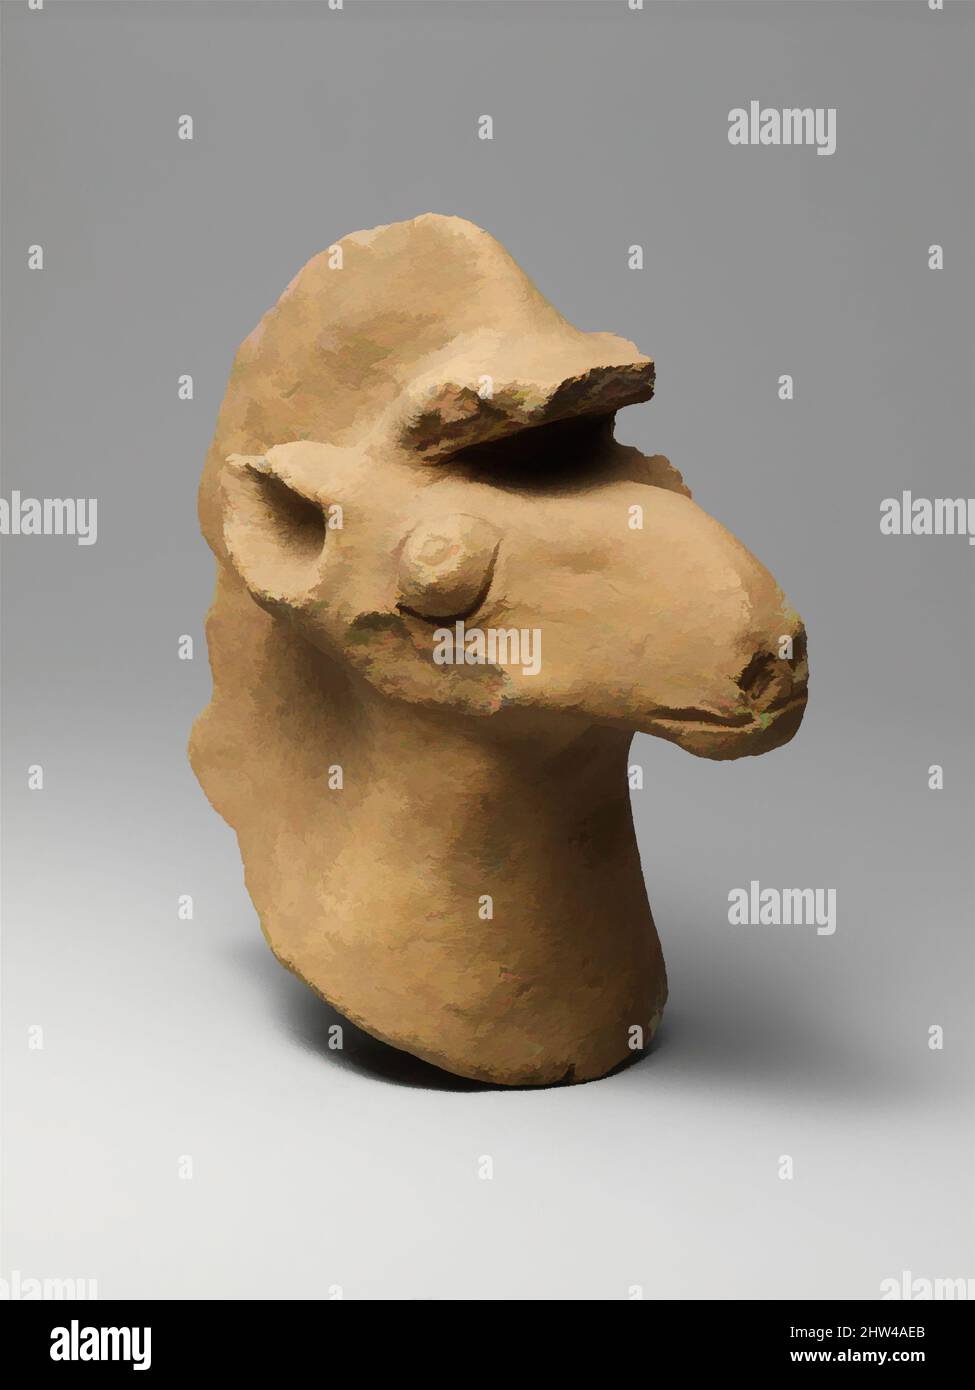 Art inspired by Terracotta head of a horse, Iron Age, ca. 11th–8th century B.C., Greek, Terracotta, H. 5 7/8 in. (14.8 cm), Terracottas, Head of a horse, Classic works modernized by Artotop with a splash of modernity. Shapes, color and value, eye-catching visual impact on art. Emotions through freedom of artworks in a contemporary way. A timeless message pursuing a wildly creative new direction. Artists turning to the digital medium and creating the Artotop NFT Stock Photo